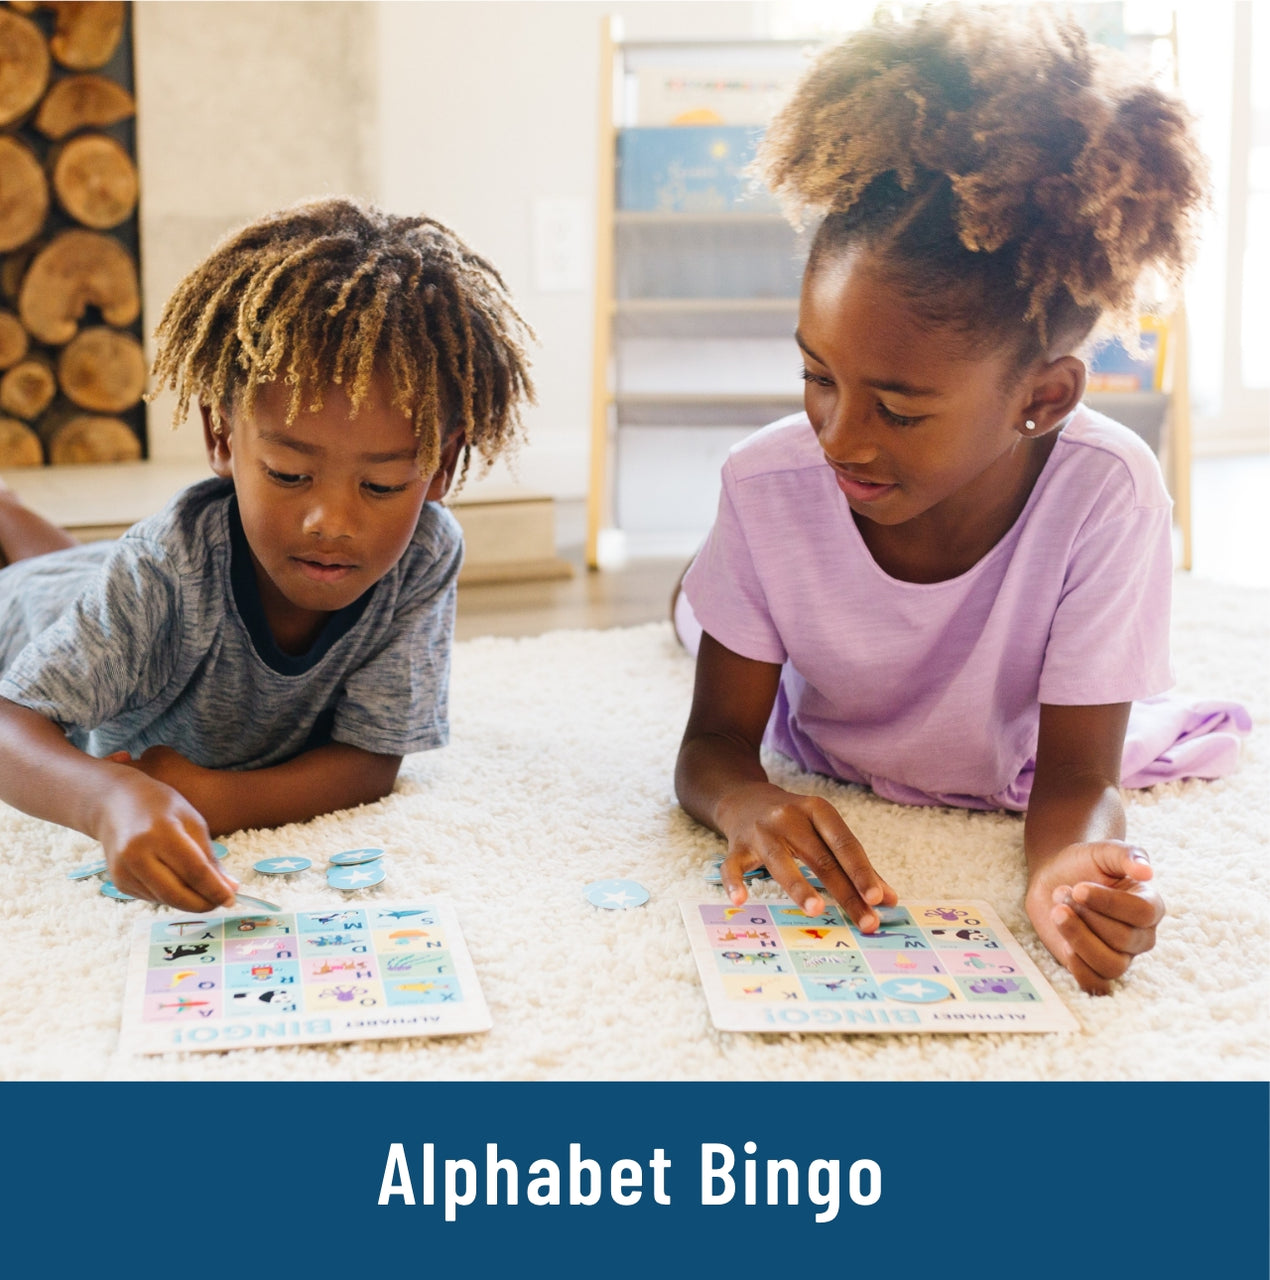 little boy and little girl laying on a white rug playing a game of Bingo, placing game pieces on a cardboard game piece